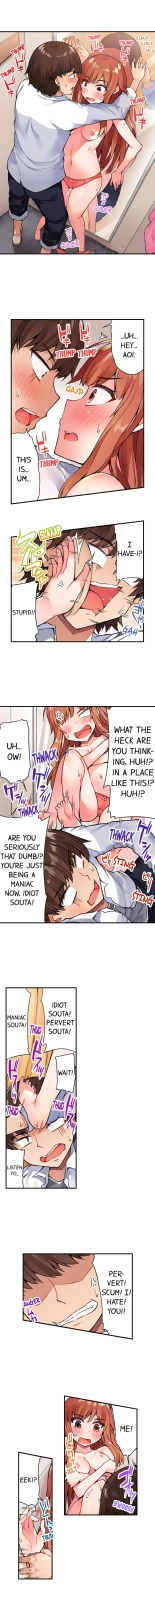 Traditional Job of Washing Girls' Body Ch. 1-171 : page 212